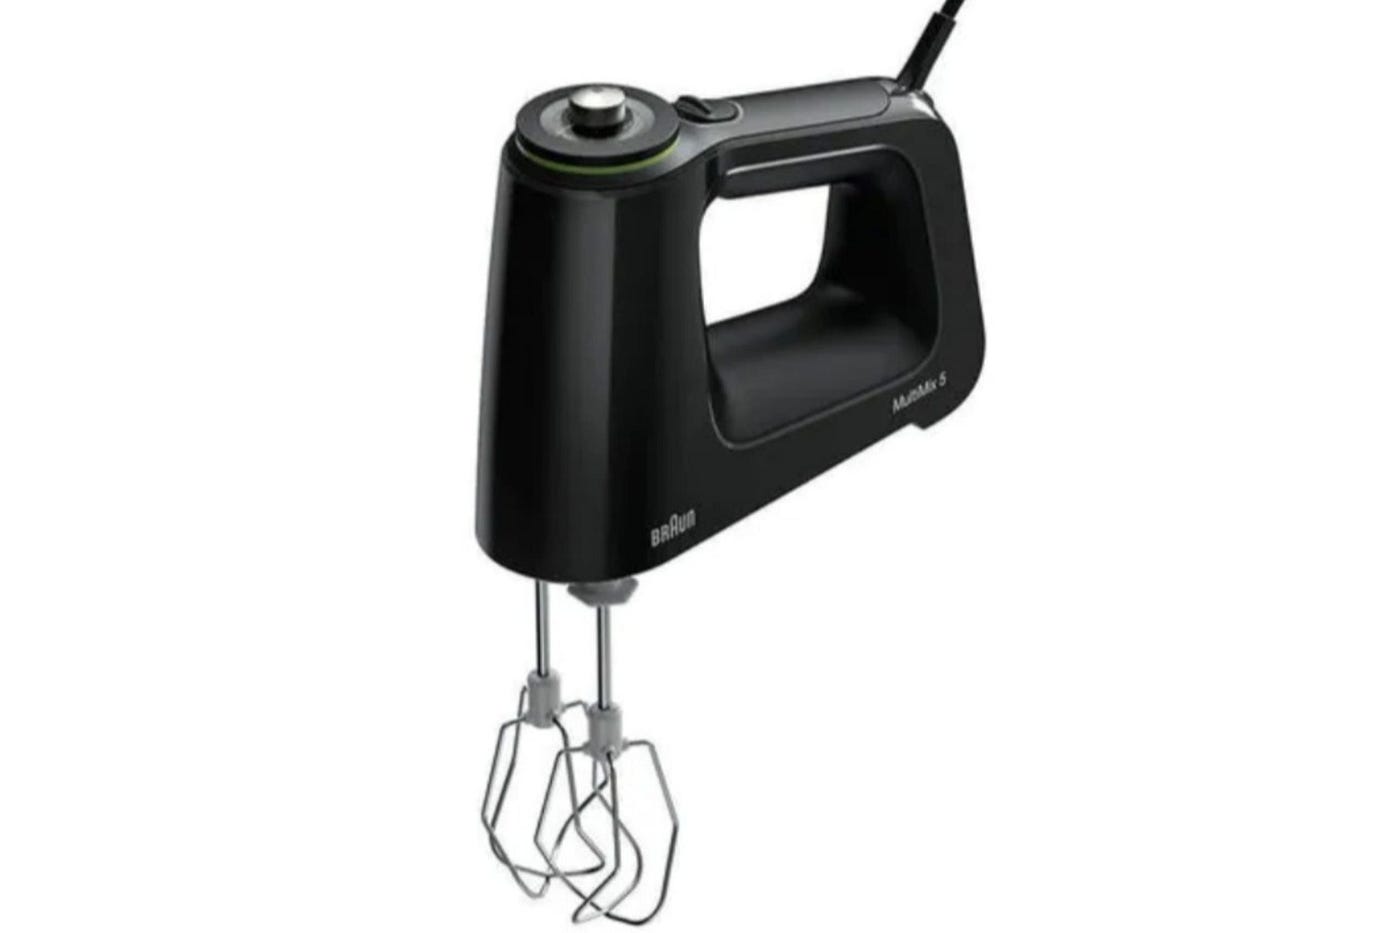 Kitchenaid 9-speed hand mixer, Full review, by Gianluca Dati